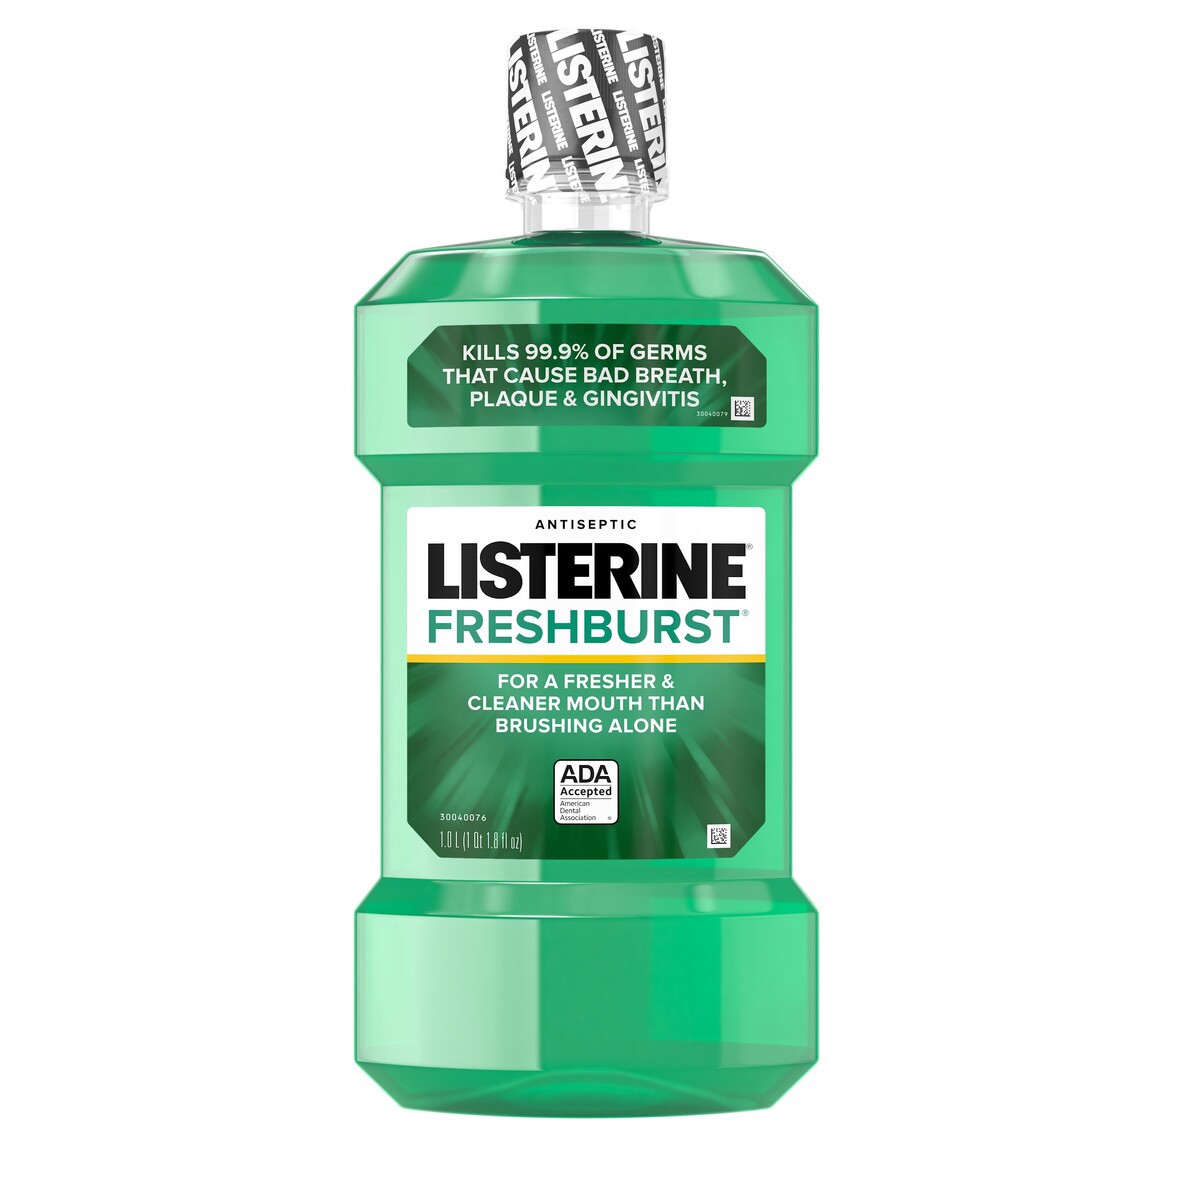 slide 4 of 6, Listerine Freshburst Antiseptic Mouthwash for Bad Breath, Kills 99% of Germs that Cause Bad Breath & Fight Plaque & Gingivitis, ADA Accepted Mouthwash, Spearmint, 1 L, 1 liter